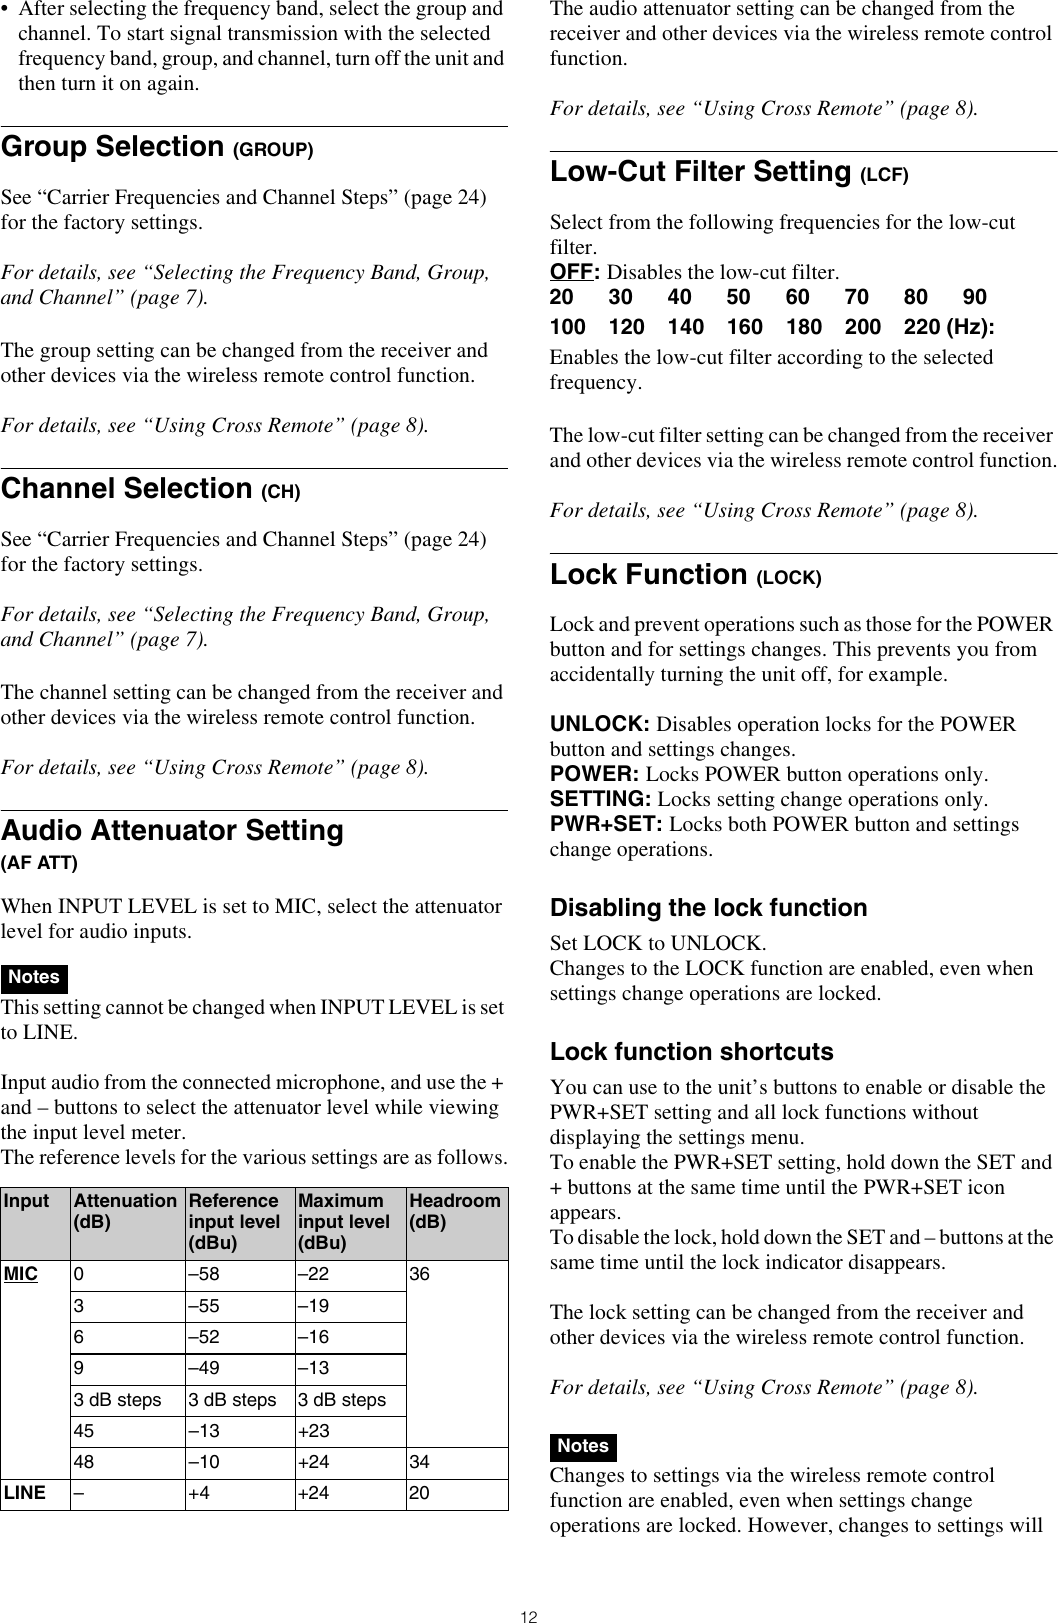 12• After selecting the frequency band, select the group and channel. To start signal transmission with the selected frequency band, group, and channel, turn off the unit and then turn it on again.Group Selection (GROUP)See “Carrier Frequencies and Channel Steps” (page 24) for the factory settings.For details, see “Selecting the Frequency Band, Group, and Channel” (page 7).The group setting can be changed from the receiver and other devices via the wireless remote control function.For details, see “Using Cross Remote” (page 8).Channel Selection (CH)See “Carrier Frequencies and Channel Steps” (page 24) for the factory settings.For details, see “Selecting the Frequency Band, Group, and Channel” (page 7).The channel setting can be changed from the receiver and other devices via the wireless remote control function.For details, see “Using Cross Remote” (page 8).Audio Attenuator Setting(AF ATT)When INPUT LEVEL is set to MIC, select the attenuator level for audio inputs.This setting cannot be changed when INPUT LEVEL is set to LINE.Input audio from the connected microphone, and use the + and – buttons to select the attenuator level while viewing the input level meter.The reference levels for the various settings are as follows.The audio attenuator setting can be changed from the receiver and other devices via the wireless remote control function.For details, see “Using Cross Remote” (page 8).Low-Cut Filter Setting (LCF)Select from the following frequencies for the low-cut filter.OFF: Disables the low-cut filter.20 30 40 50 60 70 80 90100 120 140 160 180 200 220 (Hz): Enables the low-cut filter according to the selected frequency.The low-cut filter setting can be changed from the receiver and other devices via the wireless remote control function.For details, see “Using Cross Remote” (page 8).Lock Function (LOCK)Lock and prevent operations such as those for the POWER button and for settings changes. This prevents you from accidentally turning the unit off, for example.UNLOCK: Disables operation locks for the POWER button and settings changes.POWER: Locks POWER button operations only.SETTING: Locks setting change operations only.PWR+SET: Locks both POWER button and settings change operations.Disabling the lock functionSet LOCK to UNLOCK.Changes to the LOCK function are enabled, even when settings change operations are locked.Lock function shortcutsYou can use to the unit’s buttons to enable or disable the PWR+SET setting and all lock functions without displaying the settings menu.To enable the PWR+SET setting, hold down the SET and + buttons at the same time until the PWR+SET icon appears.To disable the lock, hold down the SET and – buttons at the same time until the lock indicator disappears.The lock setting can be changed from the receiver and other devices via the wireless remote control function.For details, see “Using Cross Remote” (page 8).Changes to settings via the wireless remote control function are enabled, even when settings change operations are locked. However, changes to settings will NotesInput Attenuation (dB) Reference input level (dBu)Maximum input level (dBu)Headroom (dB)MIC 0 –58 –22 36 3 –55 –196 –52 –169 –49 –133 dB steps 3 dB steps 3 dB steps45 –13 +2348 –10 +24 34LINE –+4+2420Notes